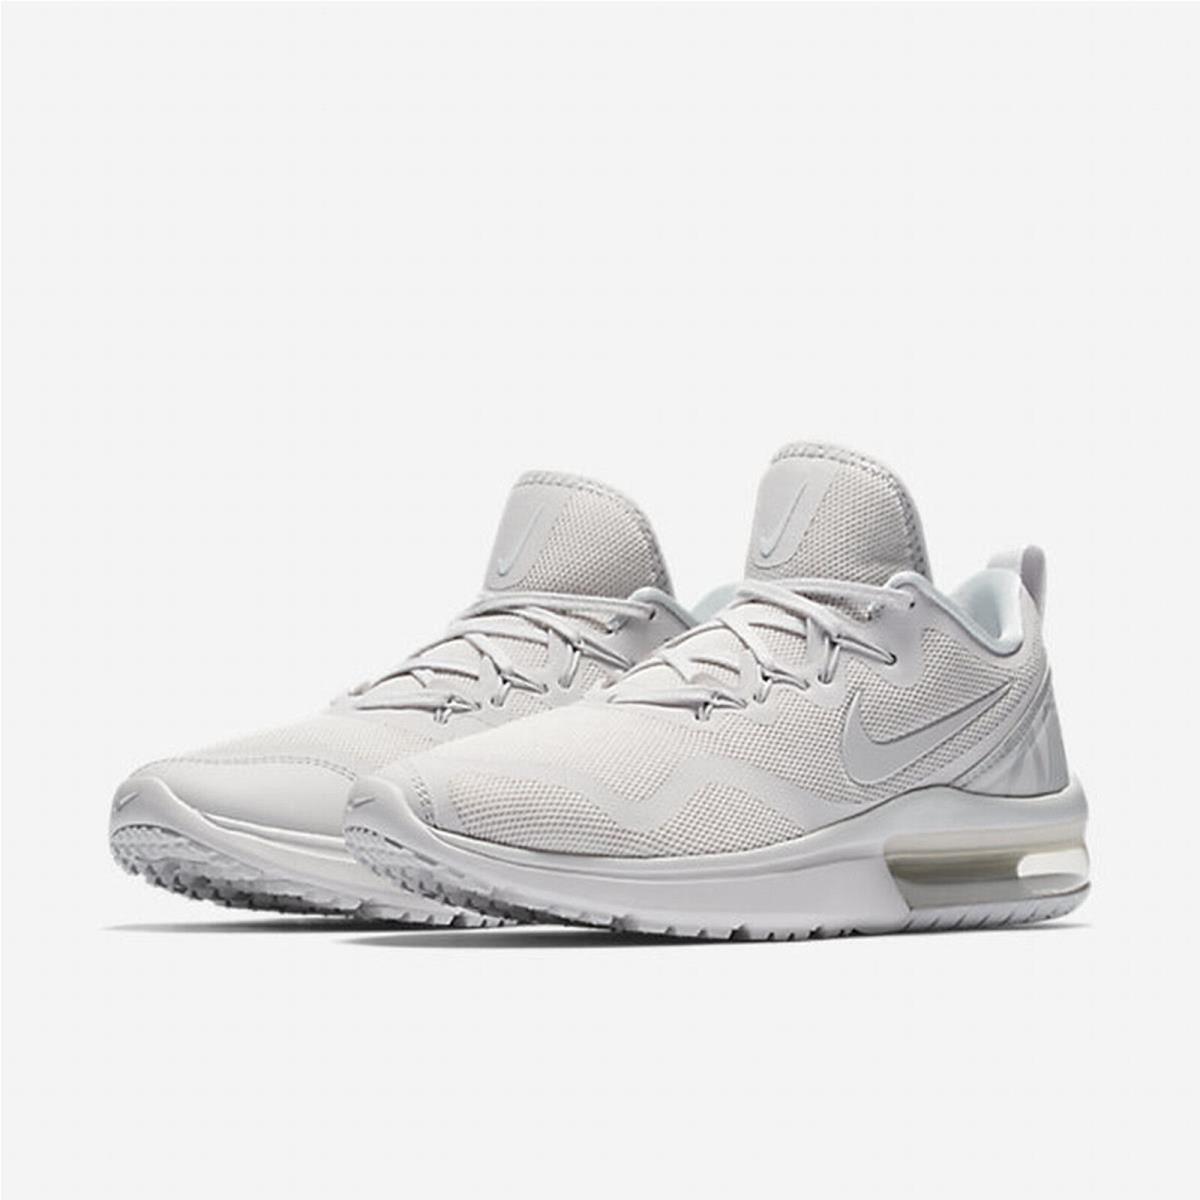 Wmns Nike Air Max Fury <AA5740-100> Women`s Running-casual Shoes with Box | 883212204622 Nike shoes AIR MAX FURY - WHITE / VAST GREY-PURE PLATIUM | SporTipTop